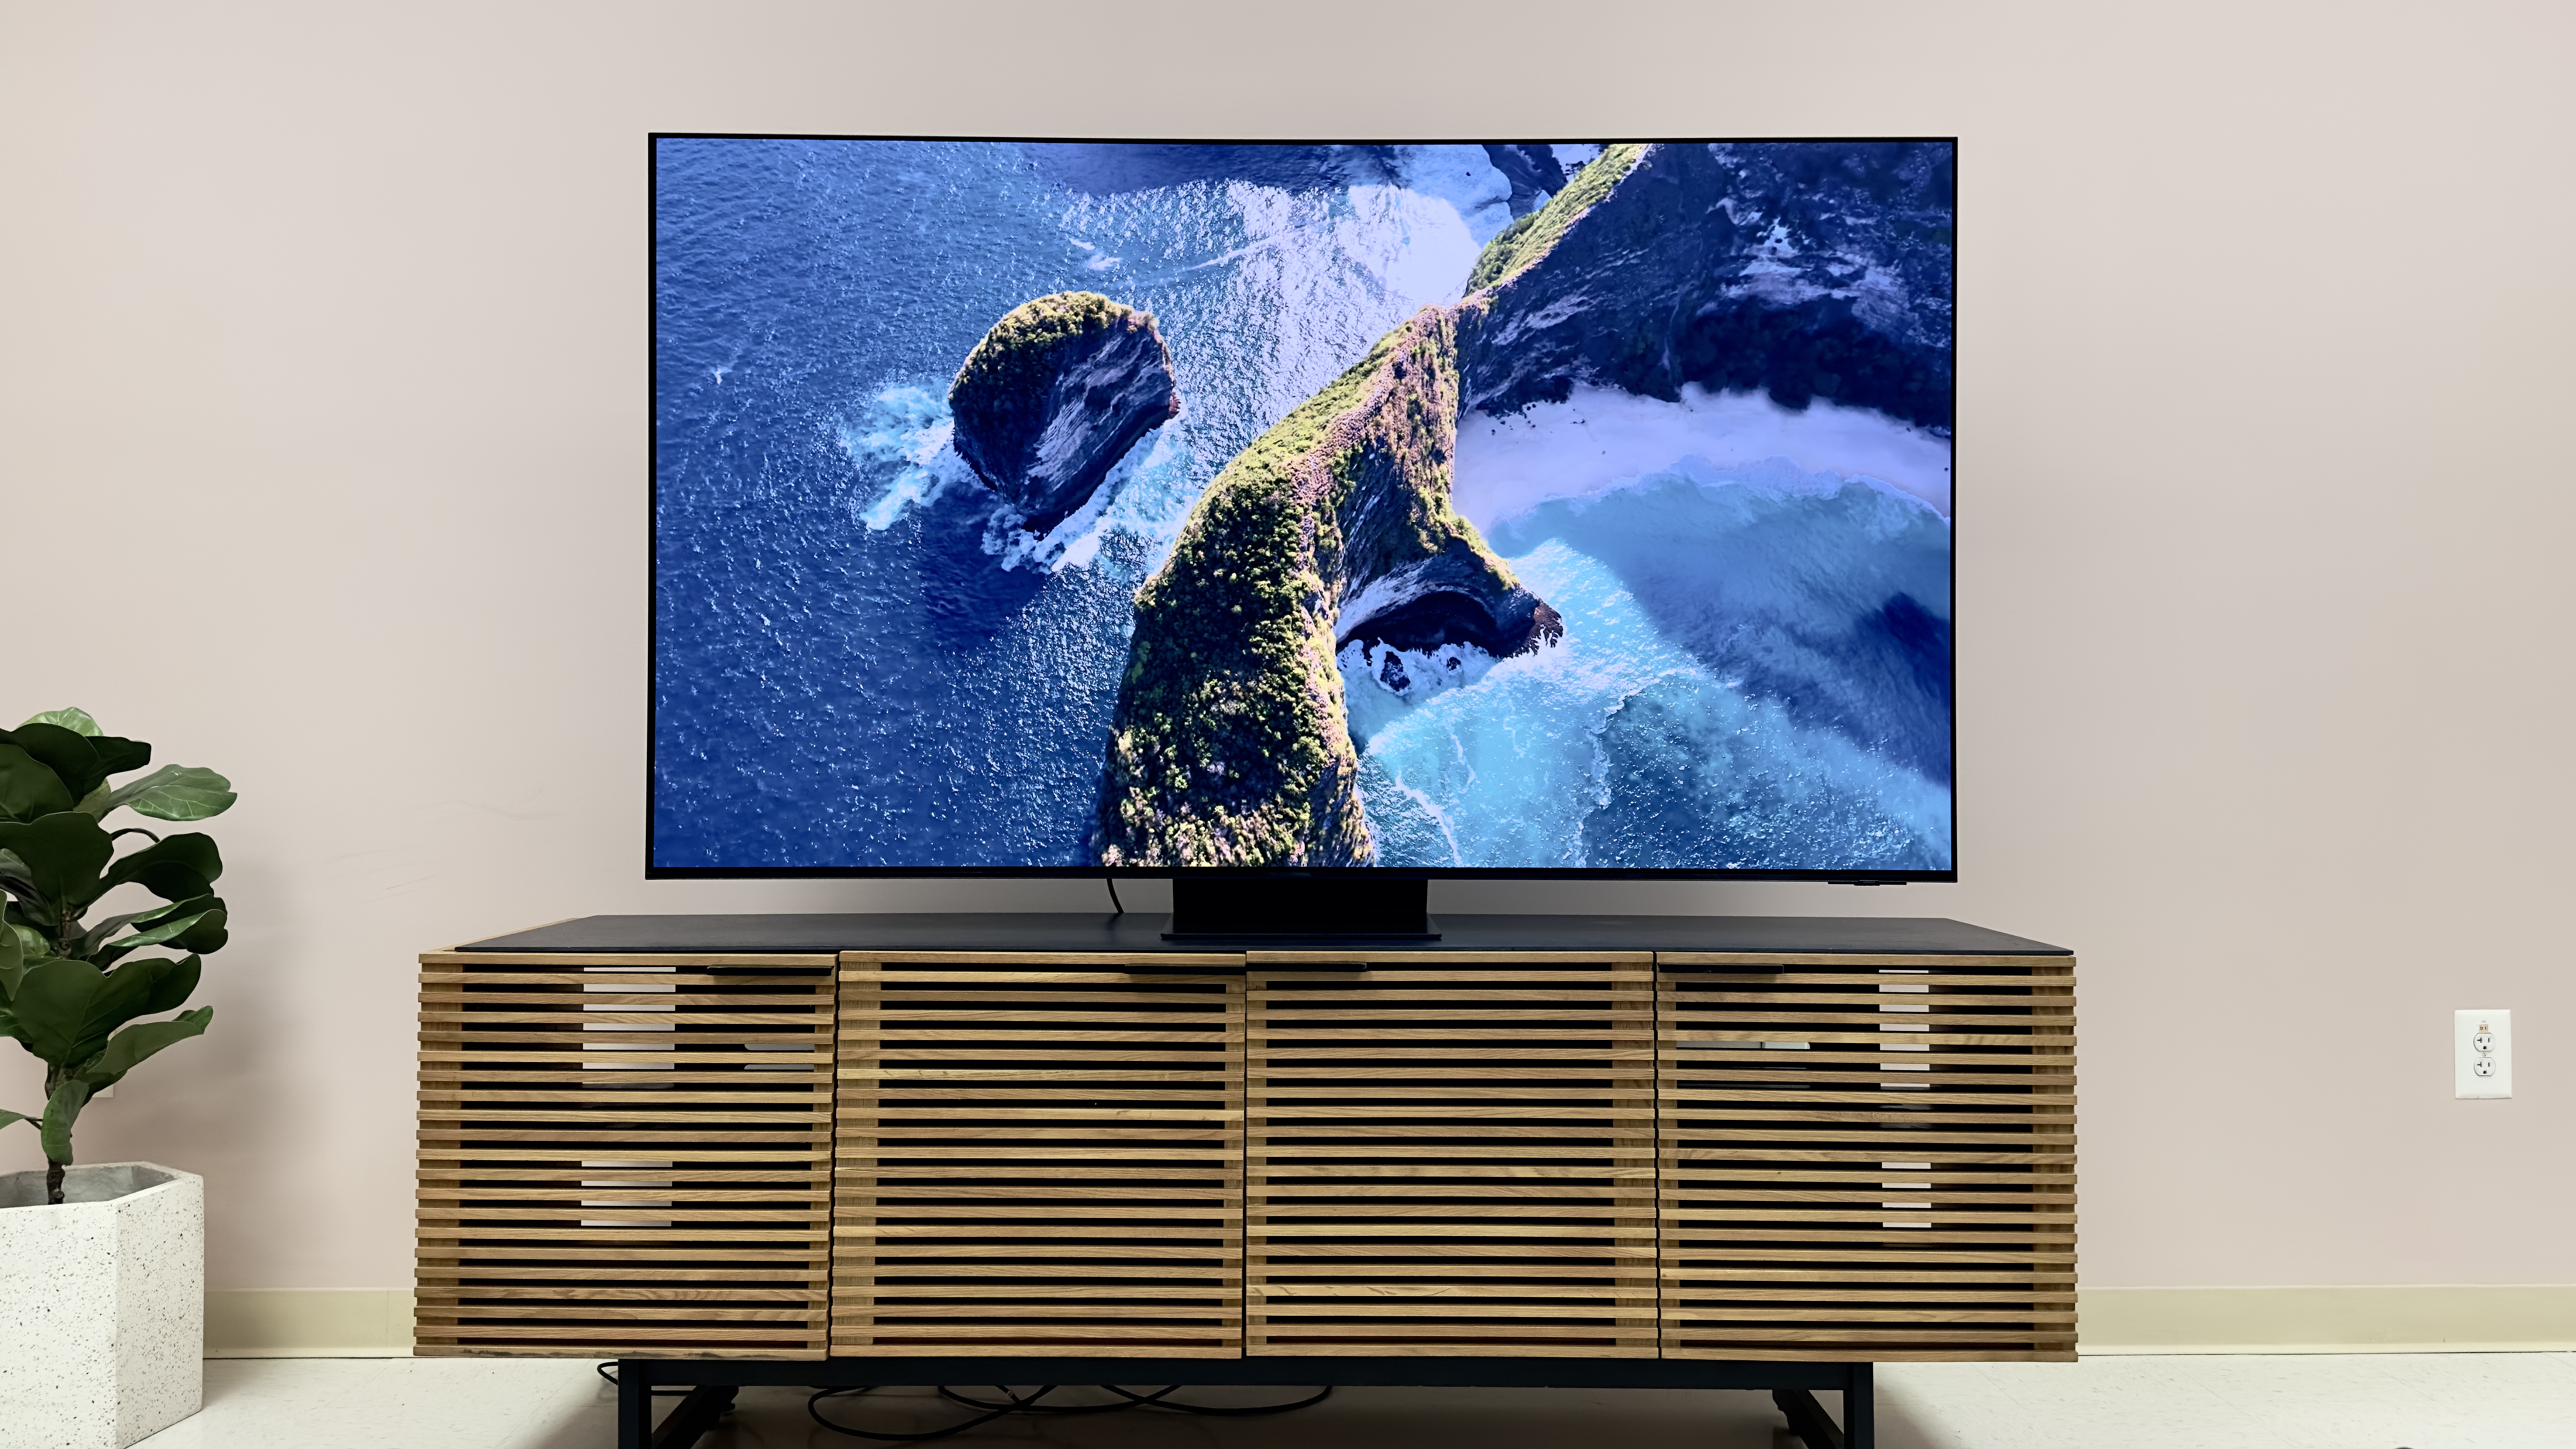 Shopping for an 8K TV? 3 to buy and 1 to skip